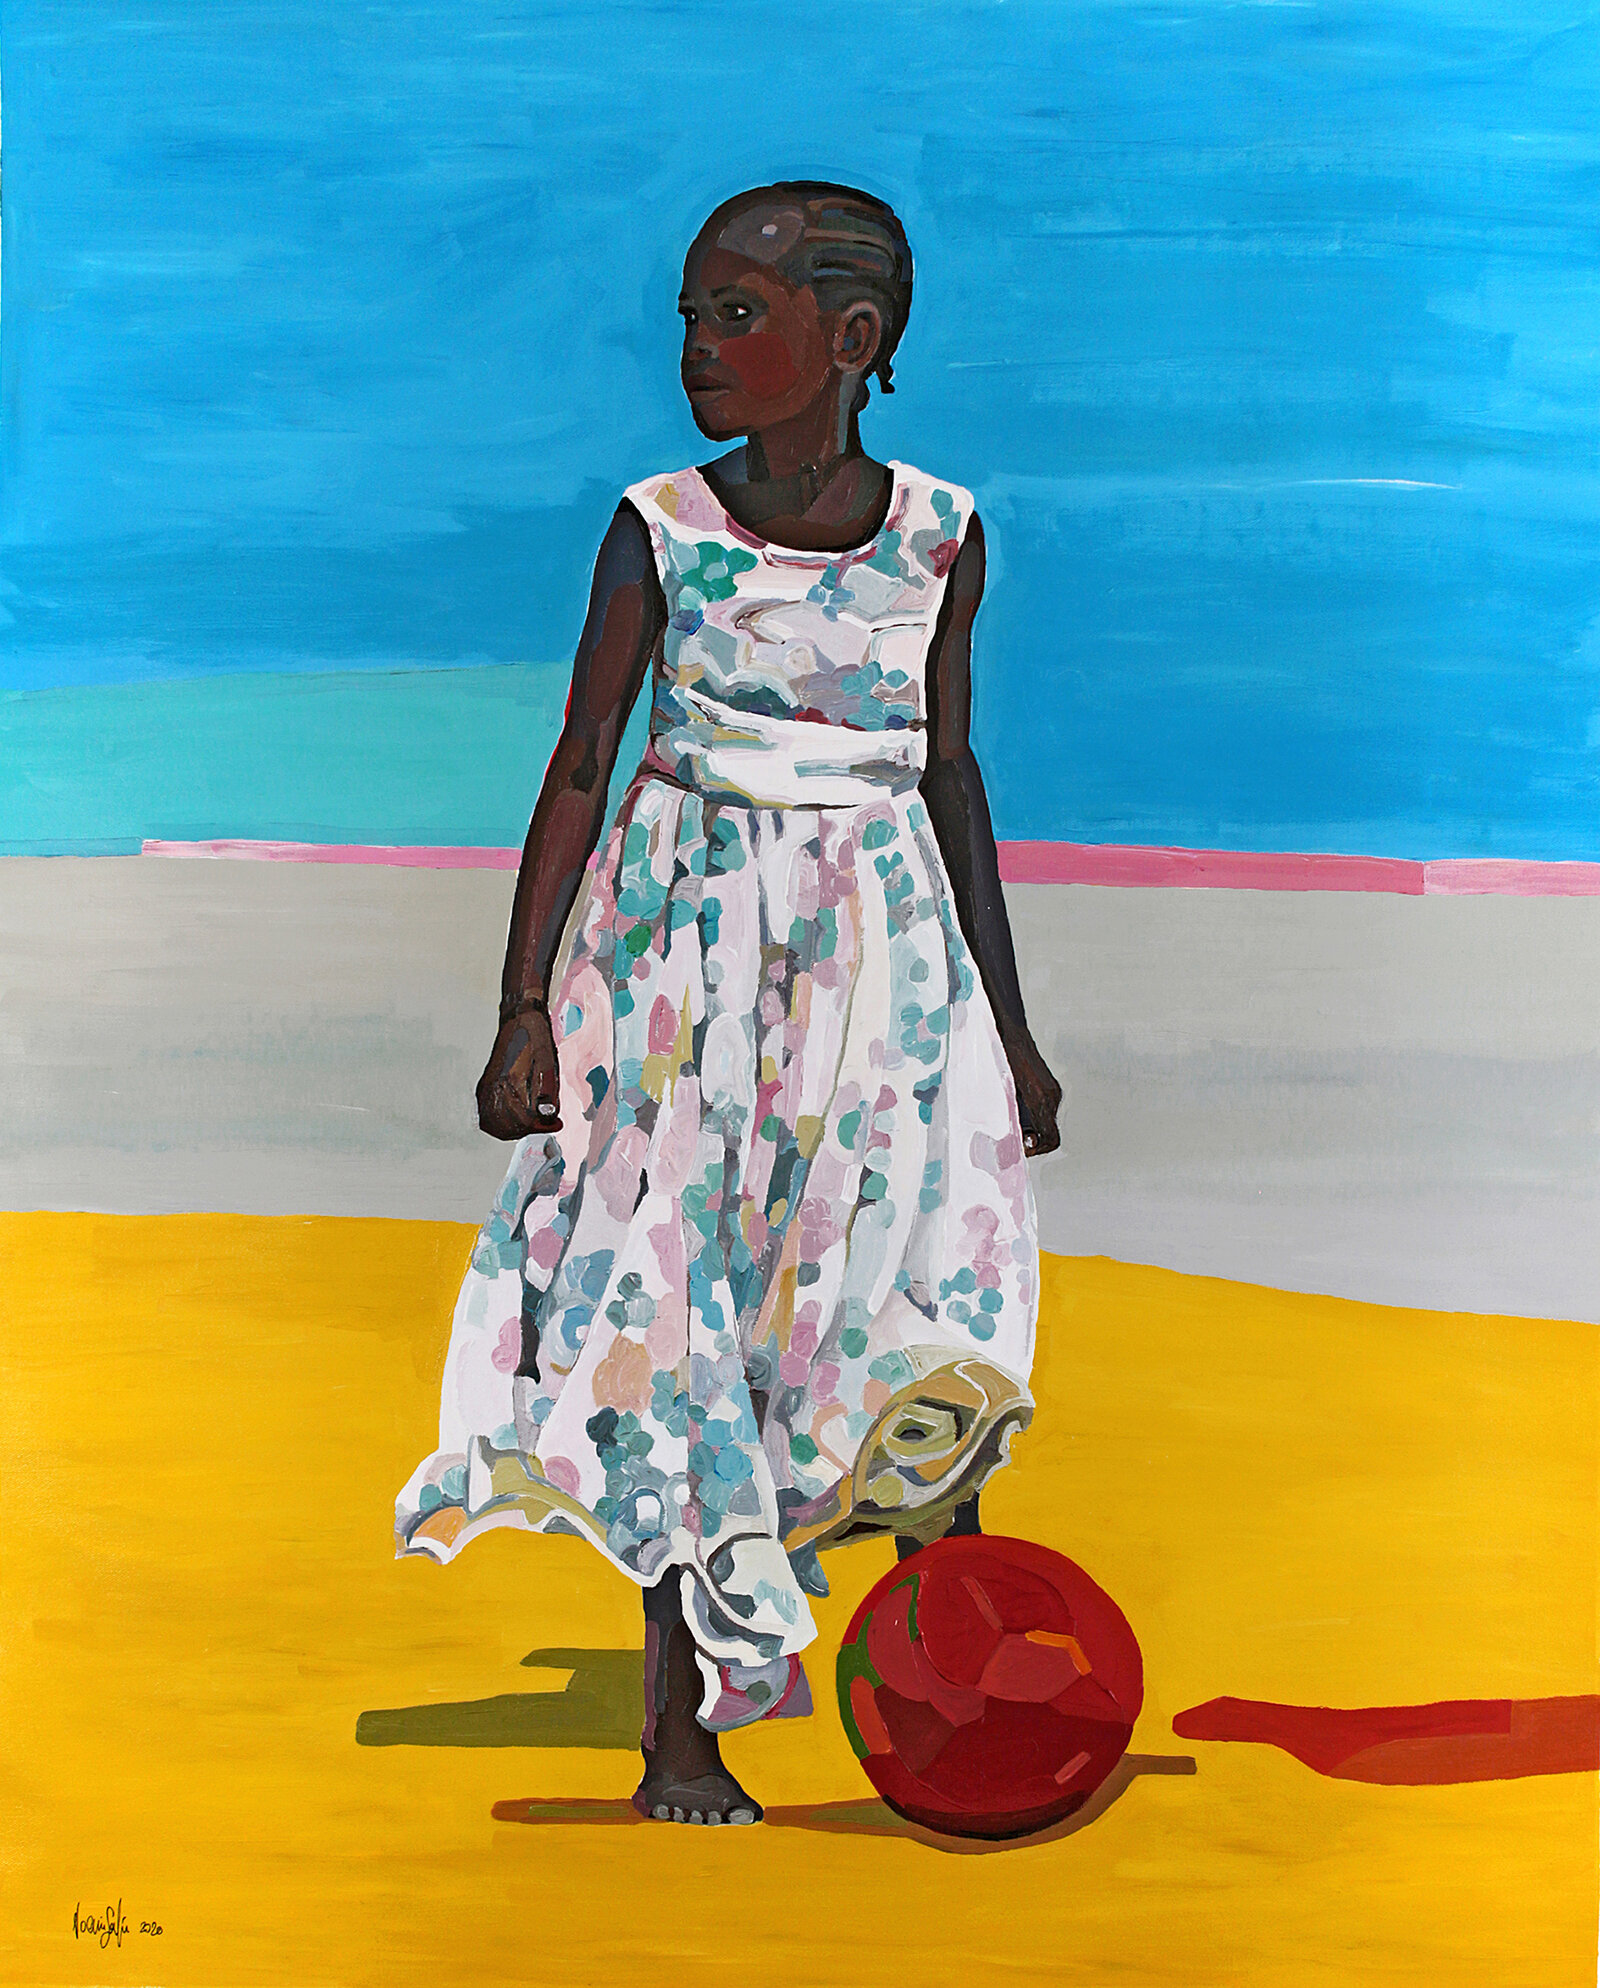 Noemi Safir_How fun it is to play outside 1_100 80 cm_Acrylic on canvas_Switzerland.jpg